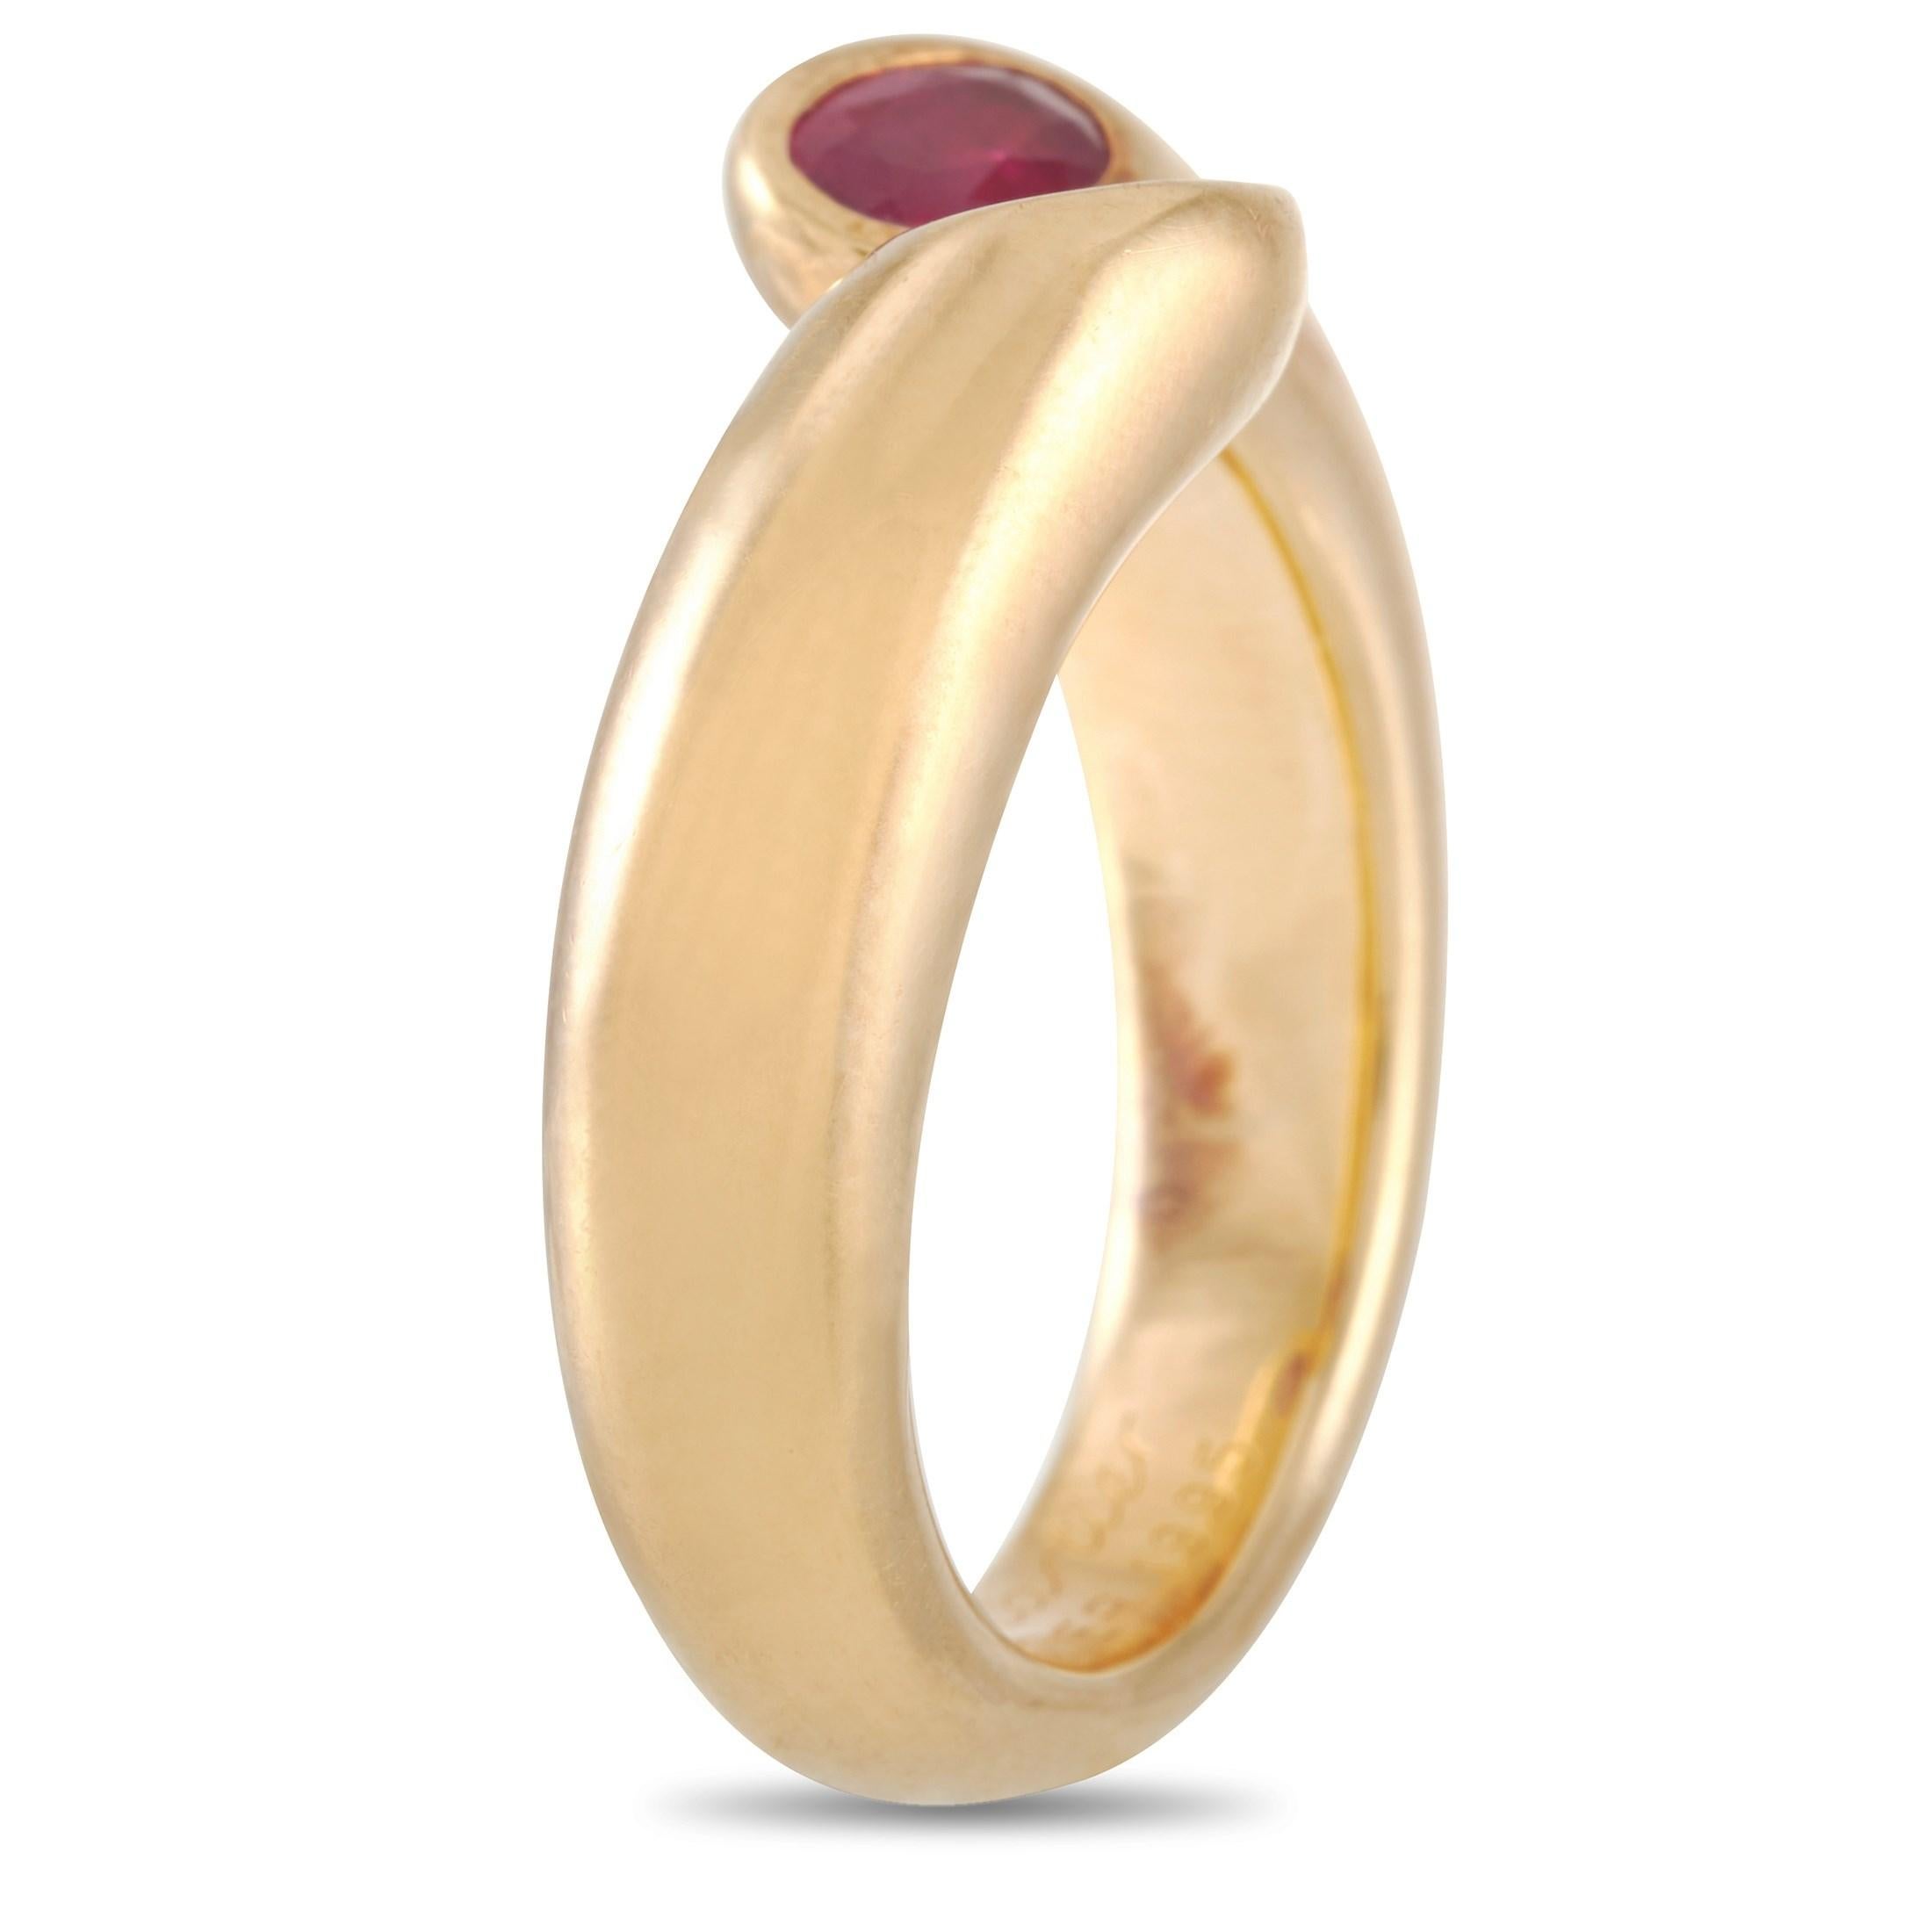 The Cartier Ellipse Deux Tetes Croisees 18K Yellow Gold Ruby Bypass Ring looks extremely chic with its contoured open bypass shank. Bringing color and an extra touch of elegance are two oval-cut ruby gemstones positioned at the rounded tips of the